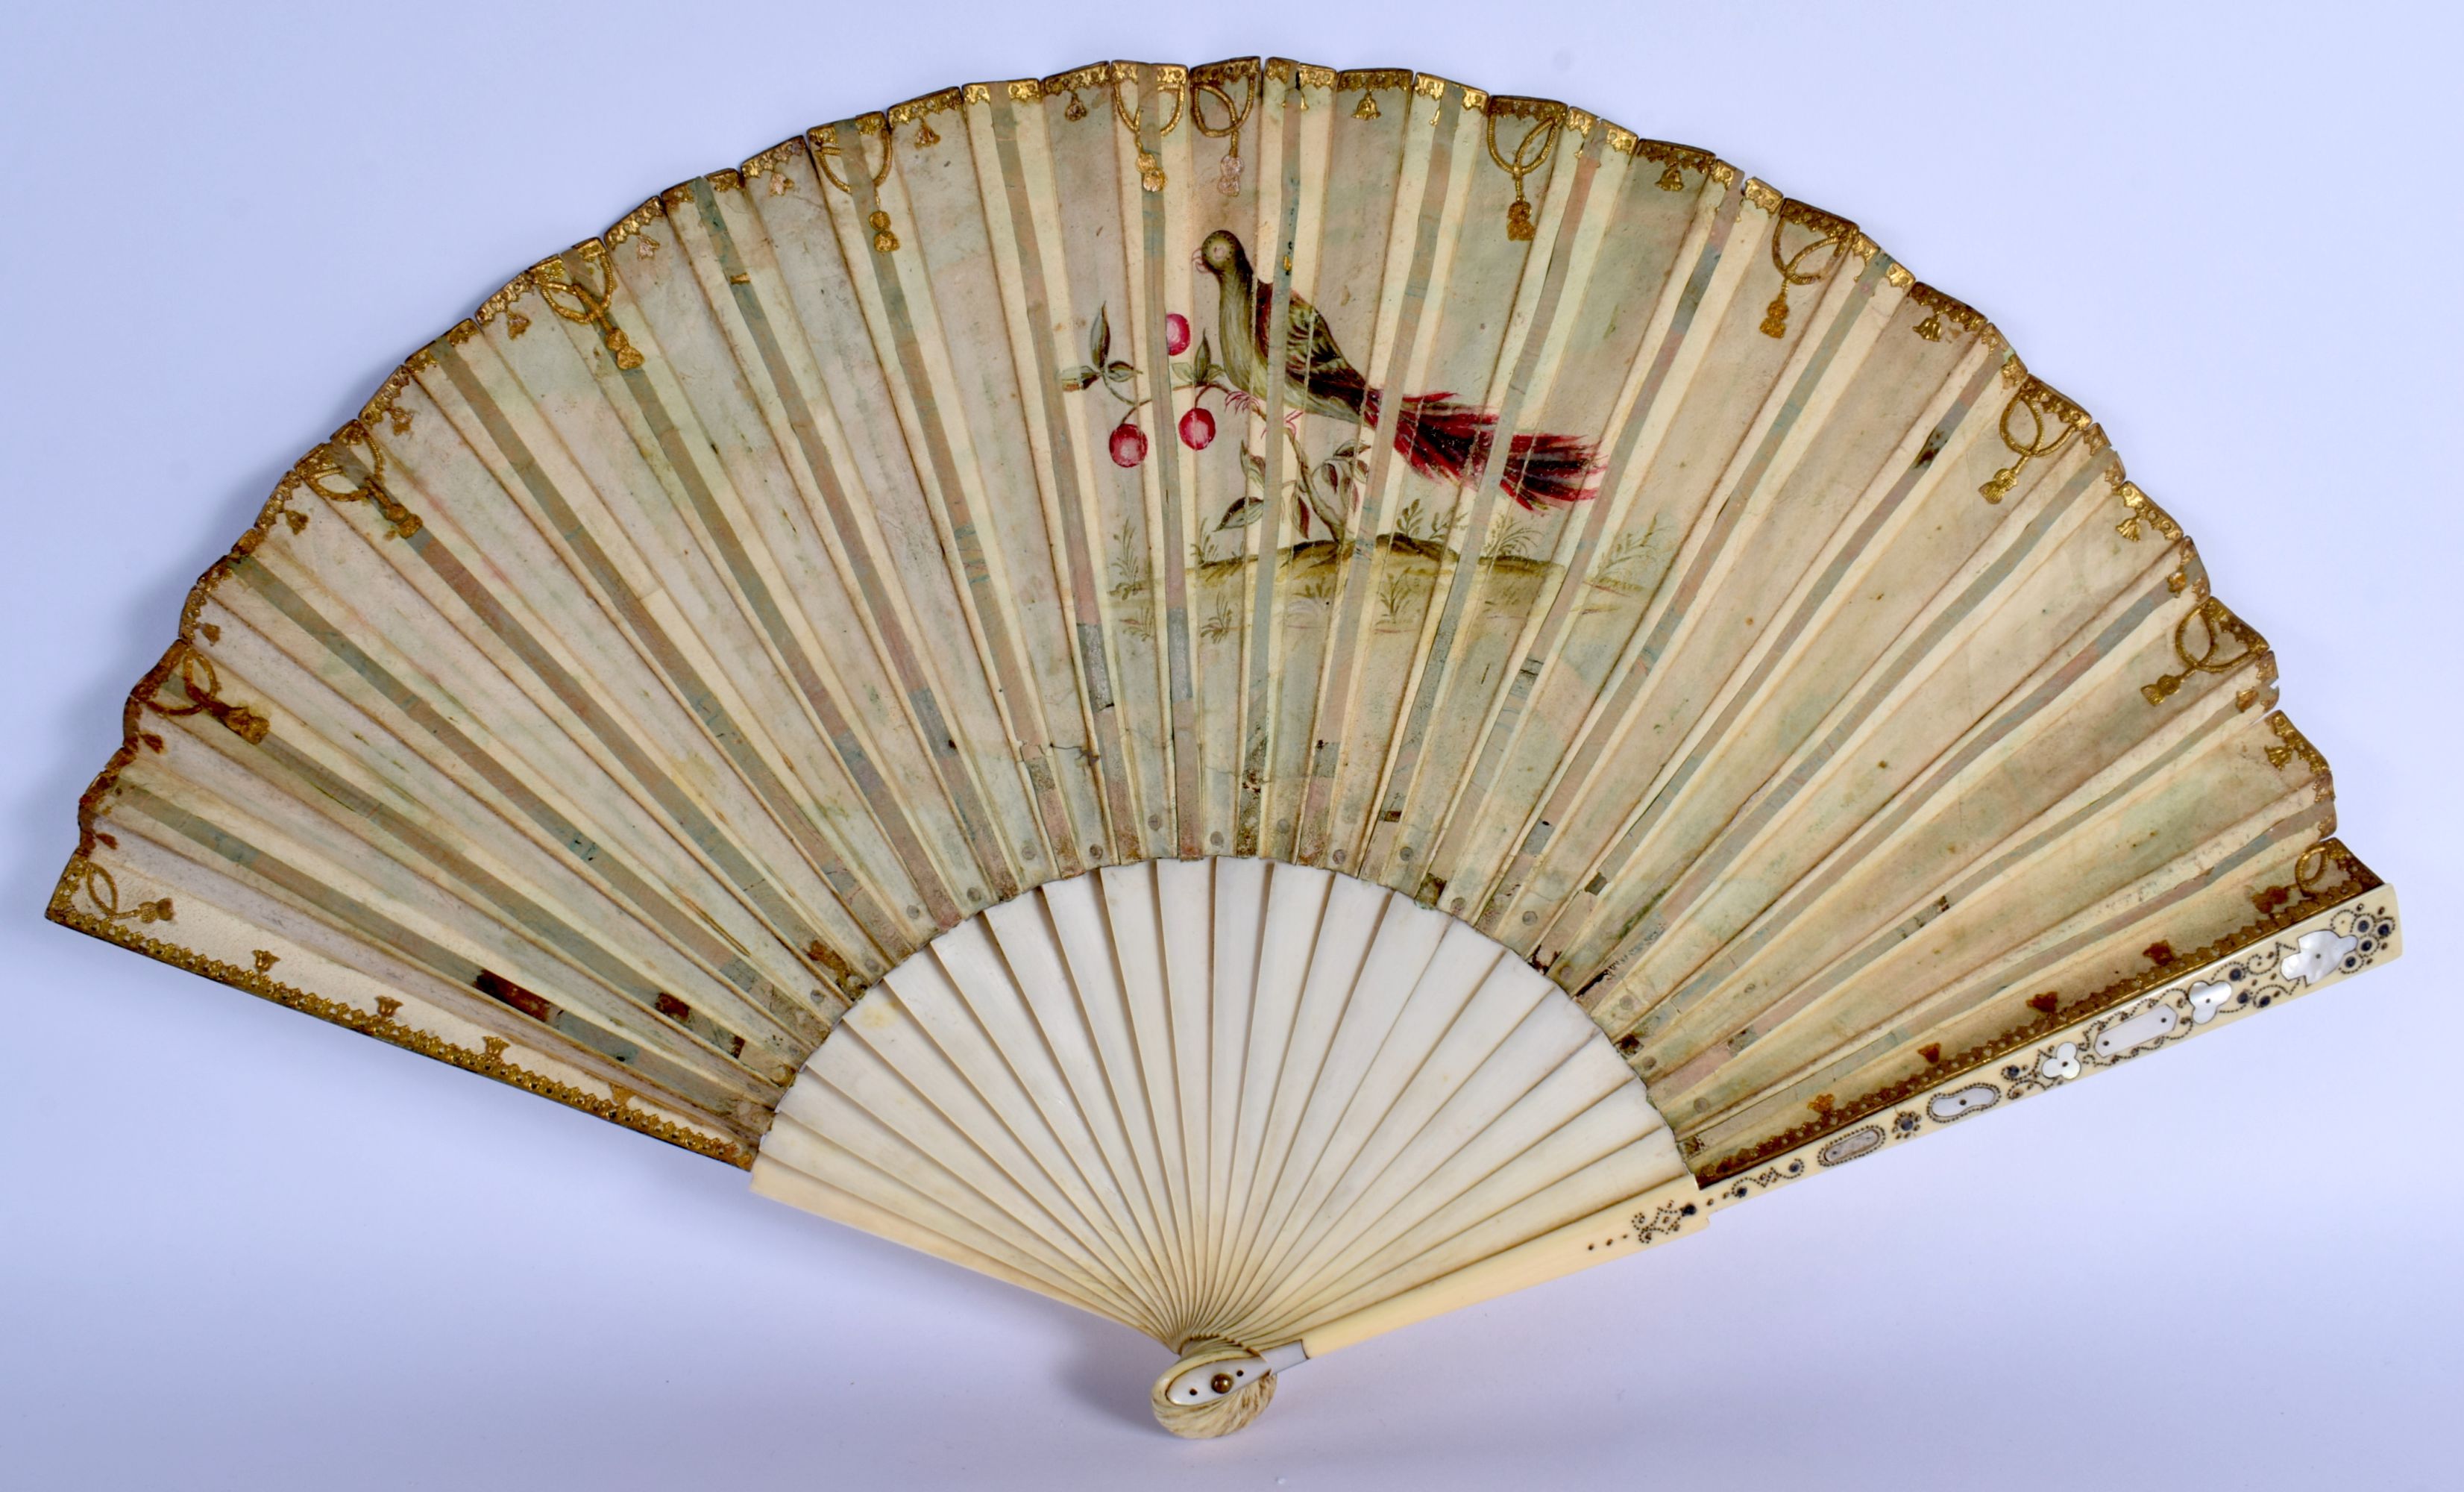 A FINE LATE 18TH CENTURY EUROPEAN PAINTED PIQUE WORK FAN decorated with classical scenes. 48 cm wide - Image 7 of 10